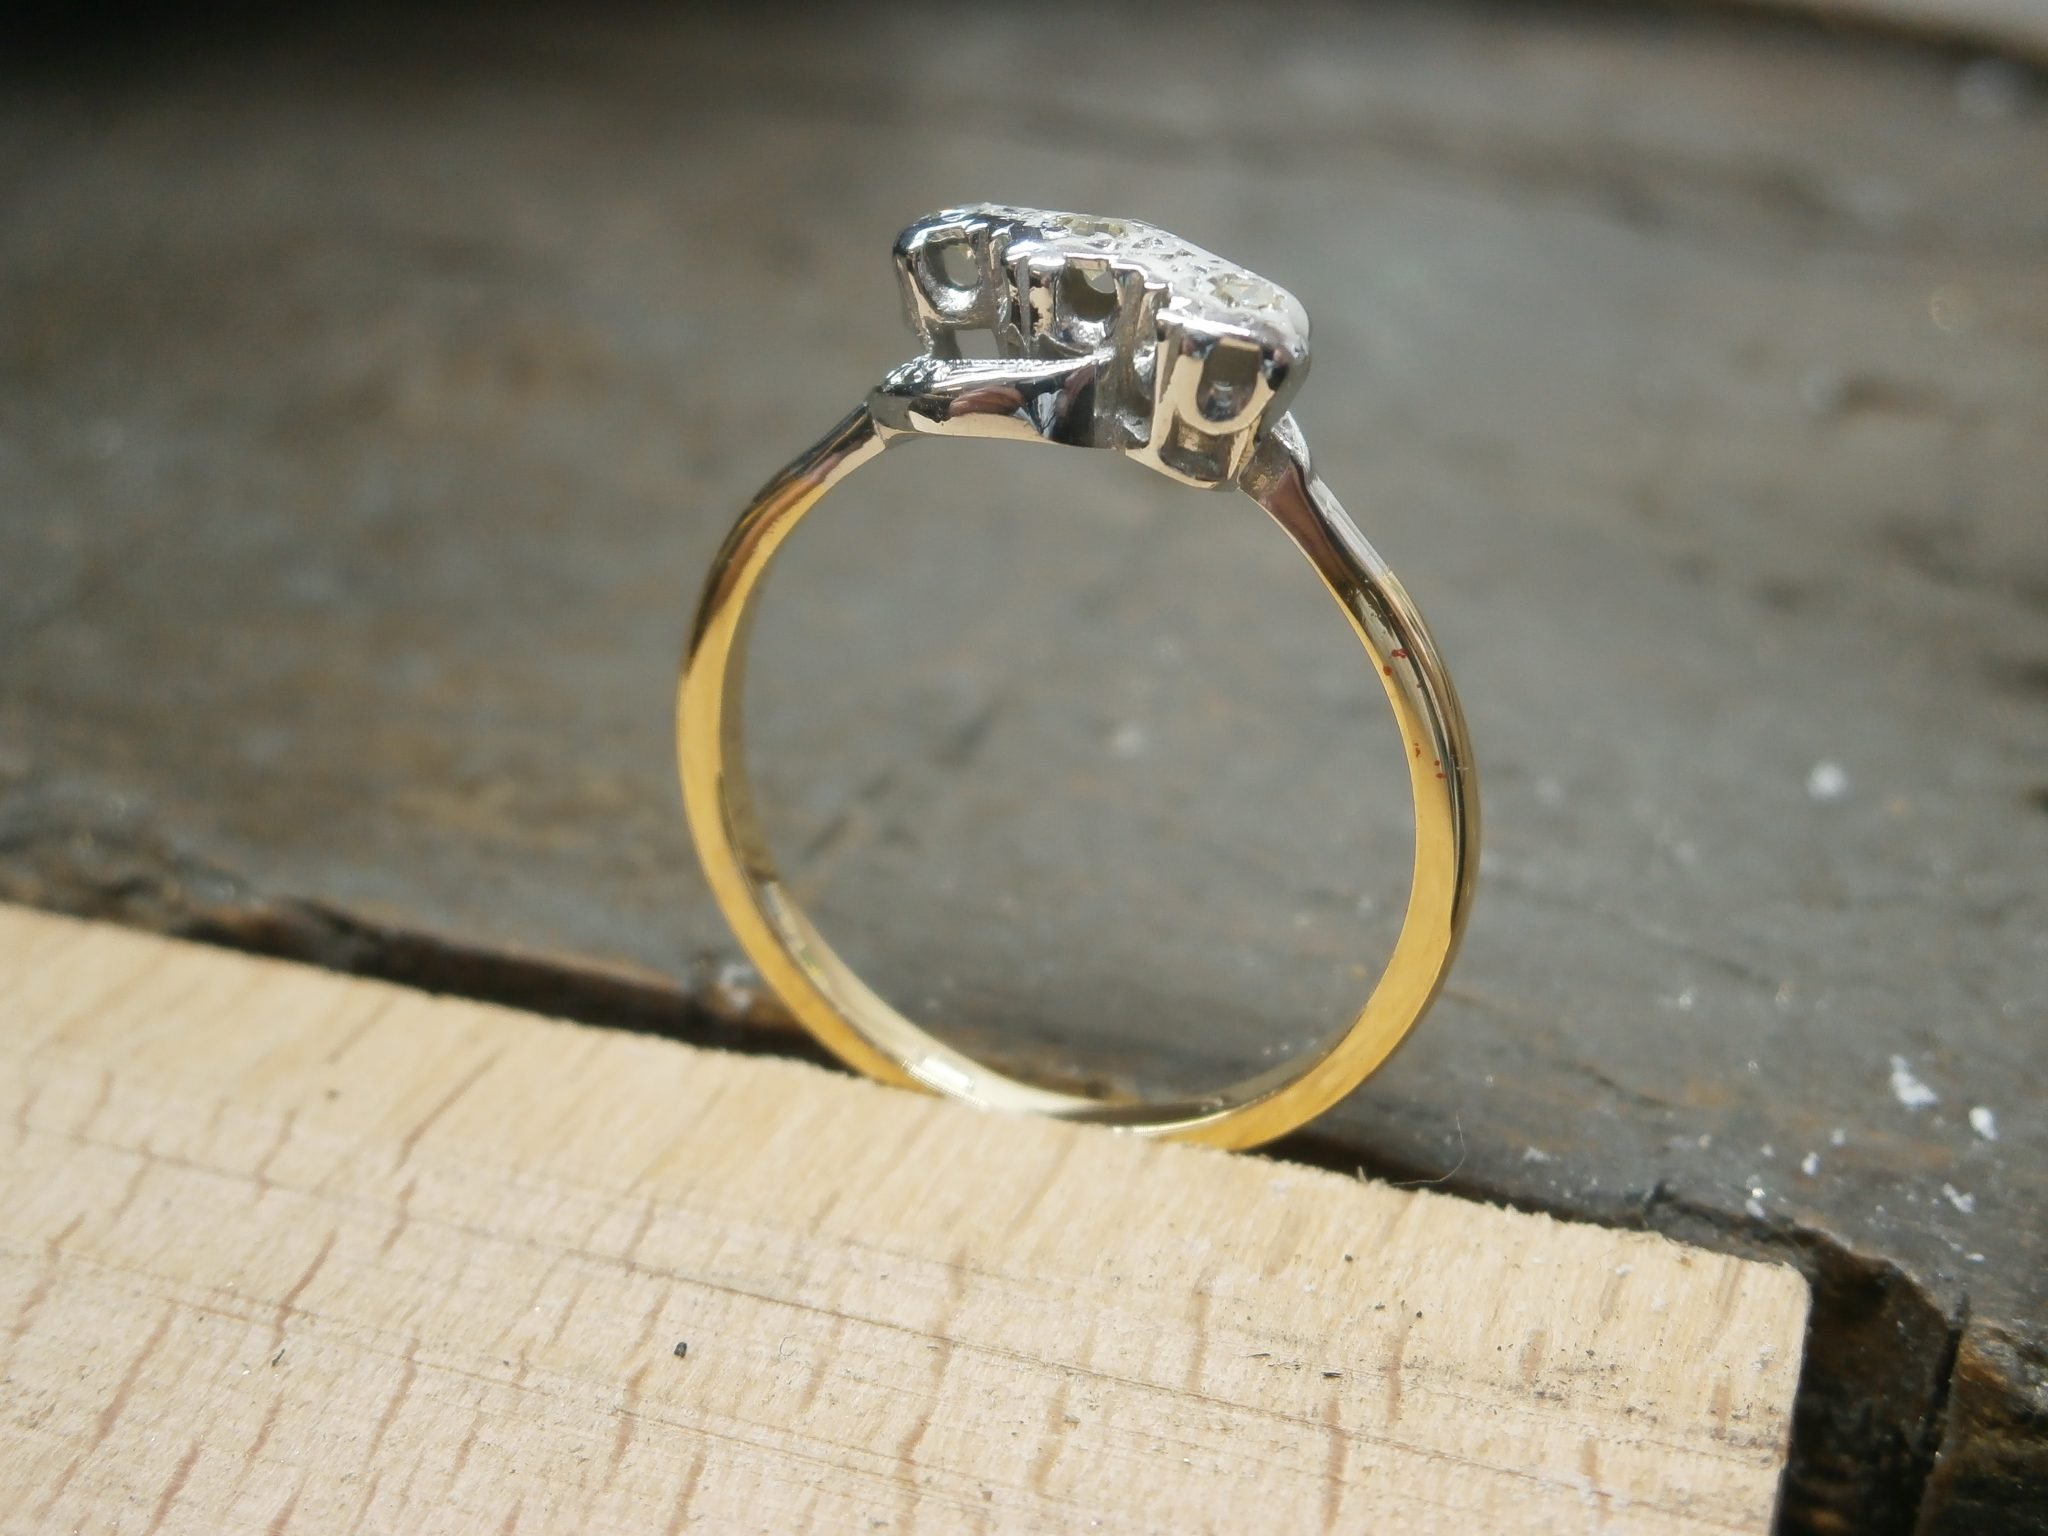 The finished ring ready for the client